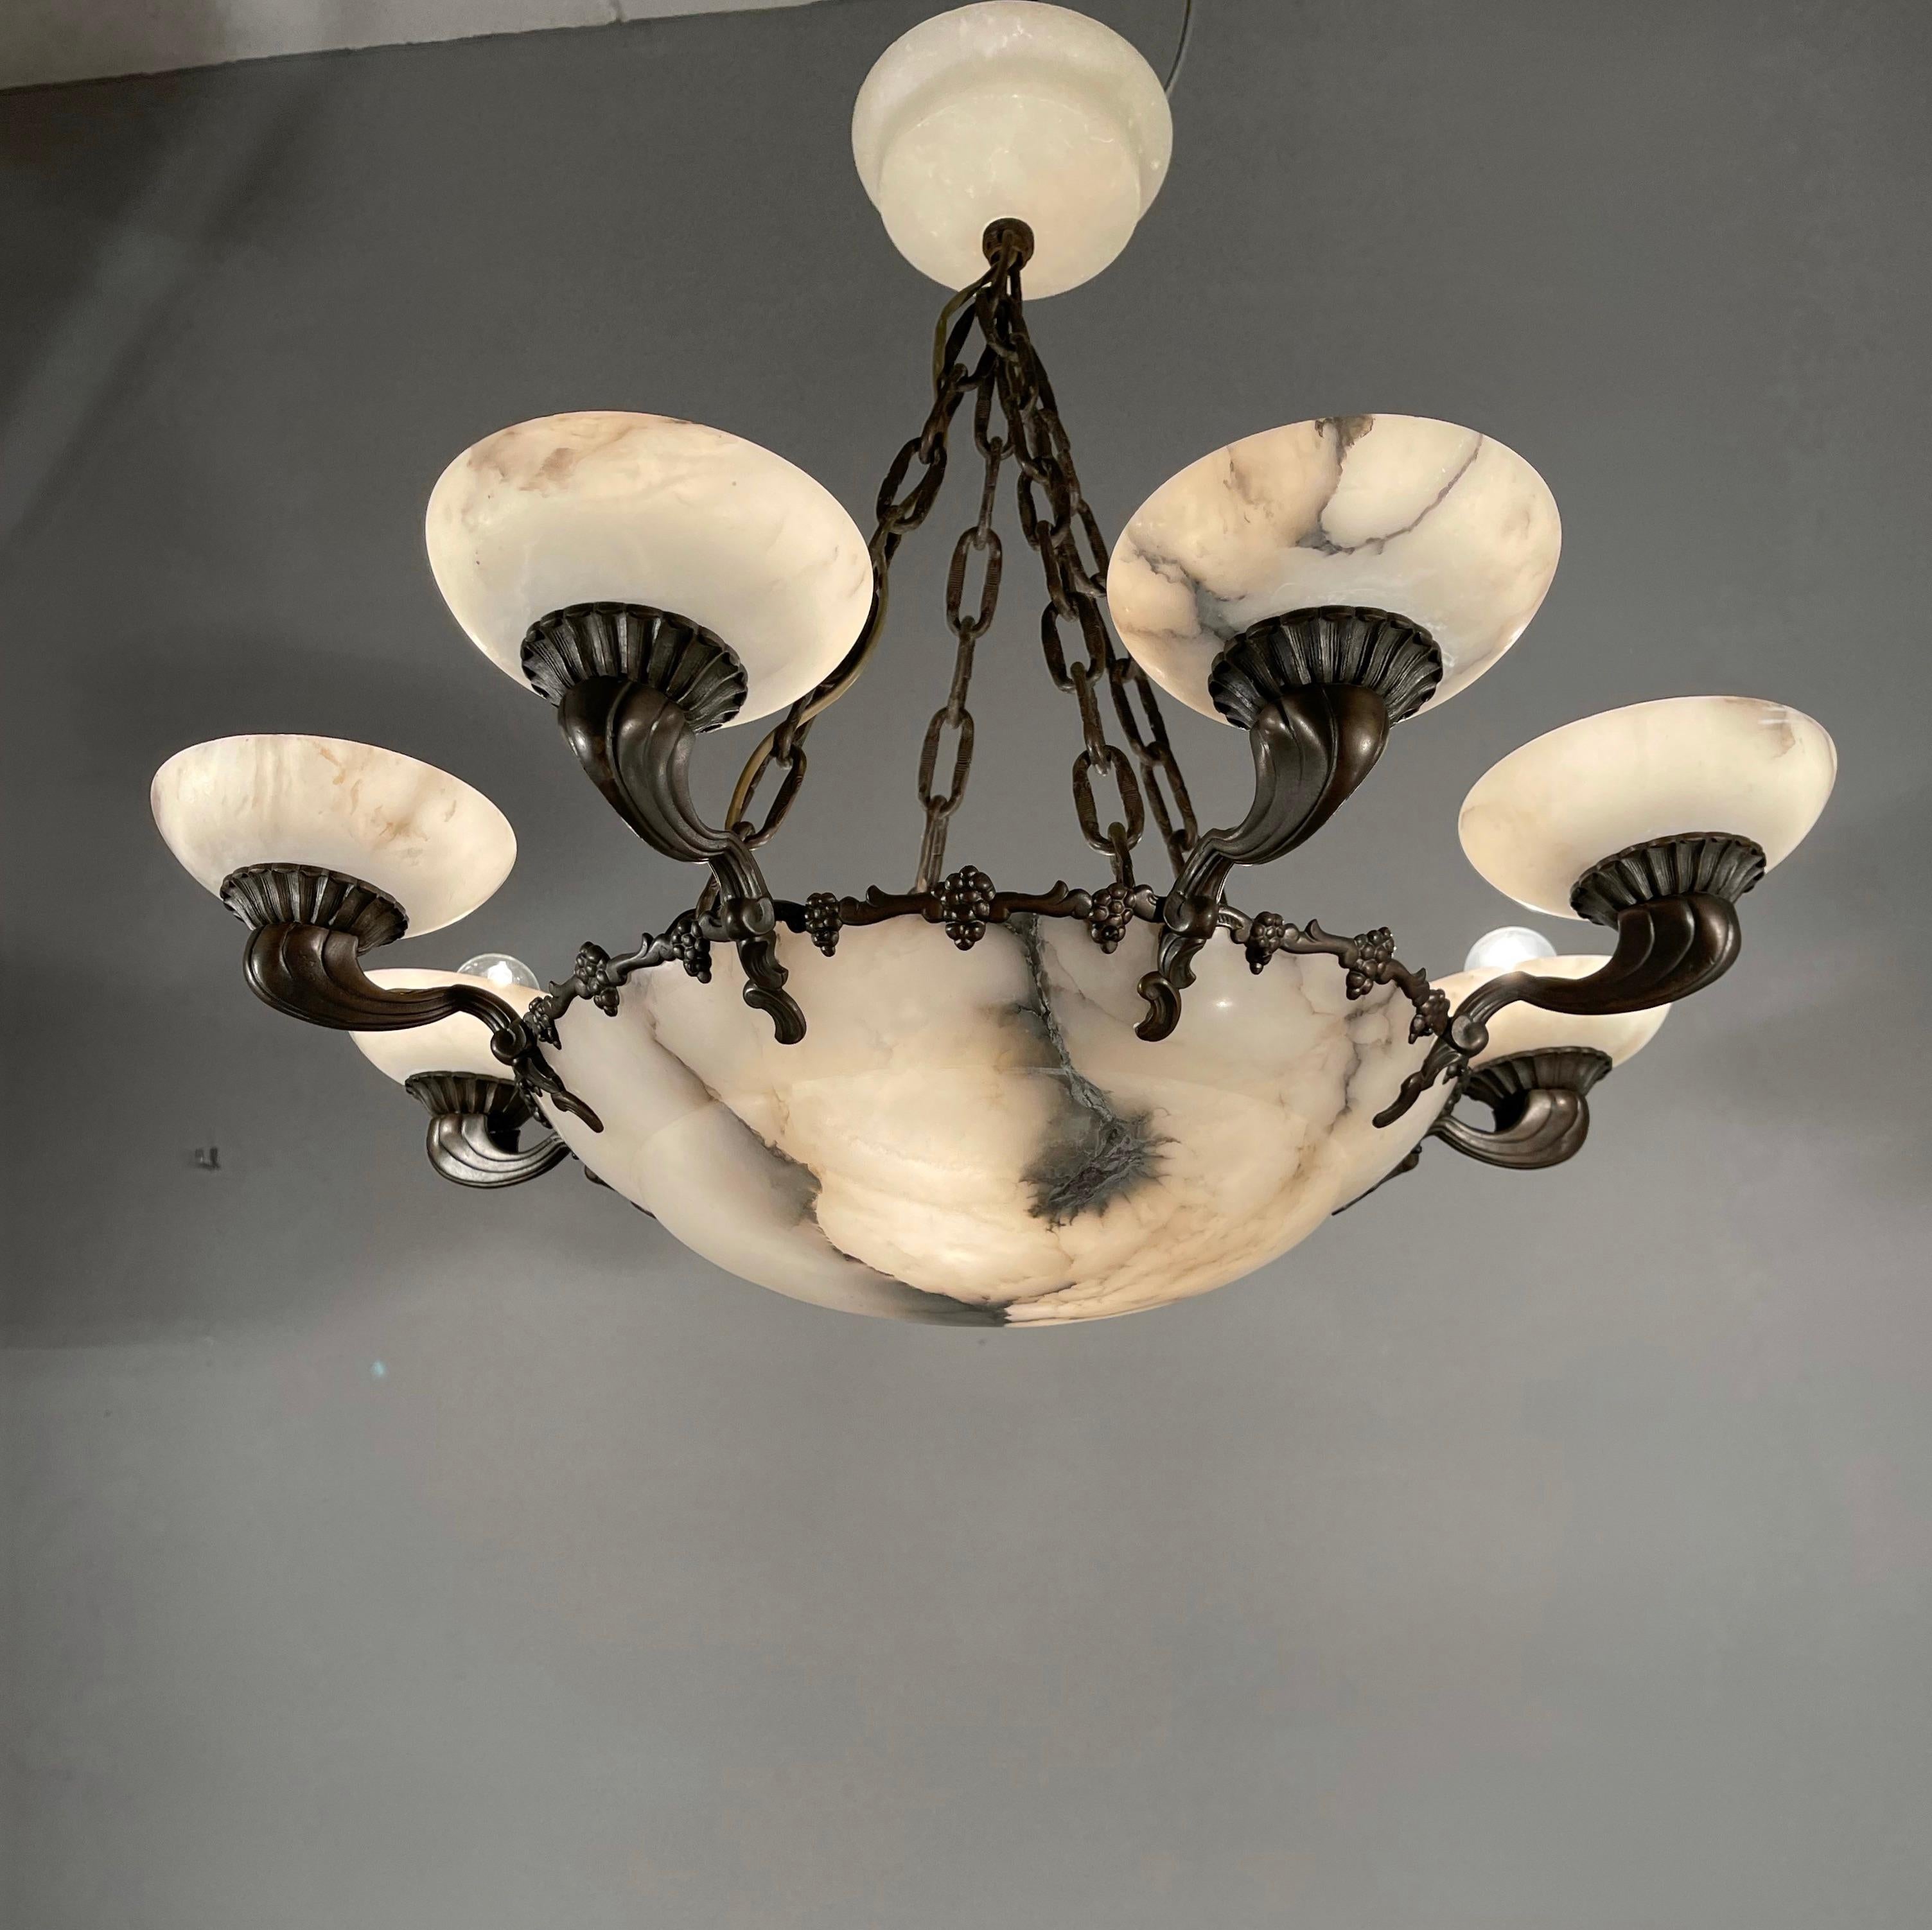 Striking and exclusive 1920s light fixture for the perfect atmosphere.

If you are looking for a remarkable light fixture to grace your living space then this American Art Deco style chandelier from circa 1920 could very well be perfect. The